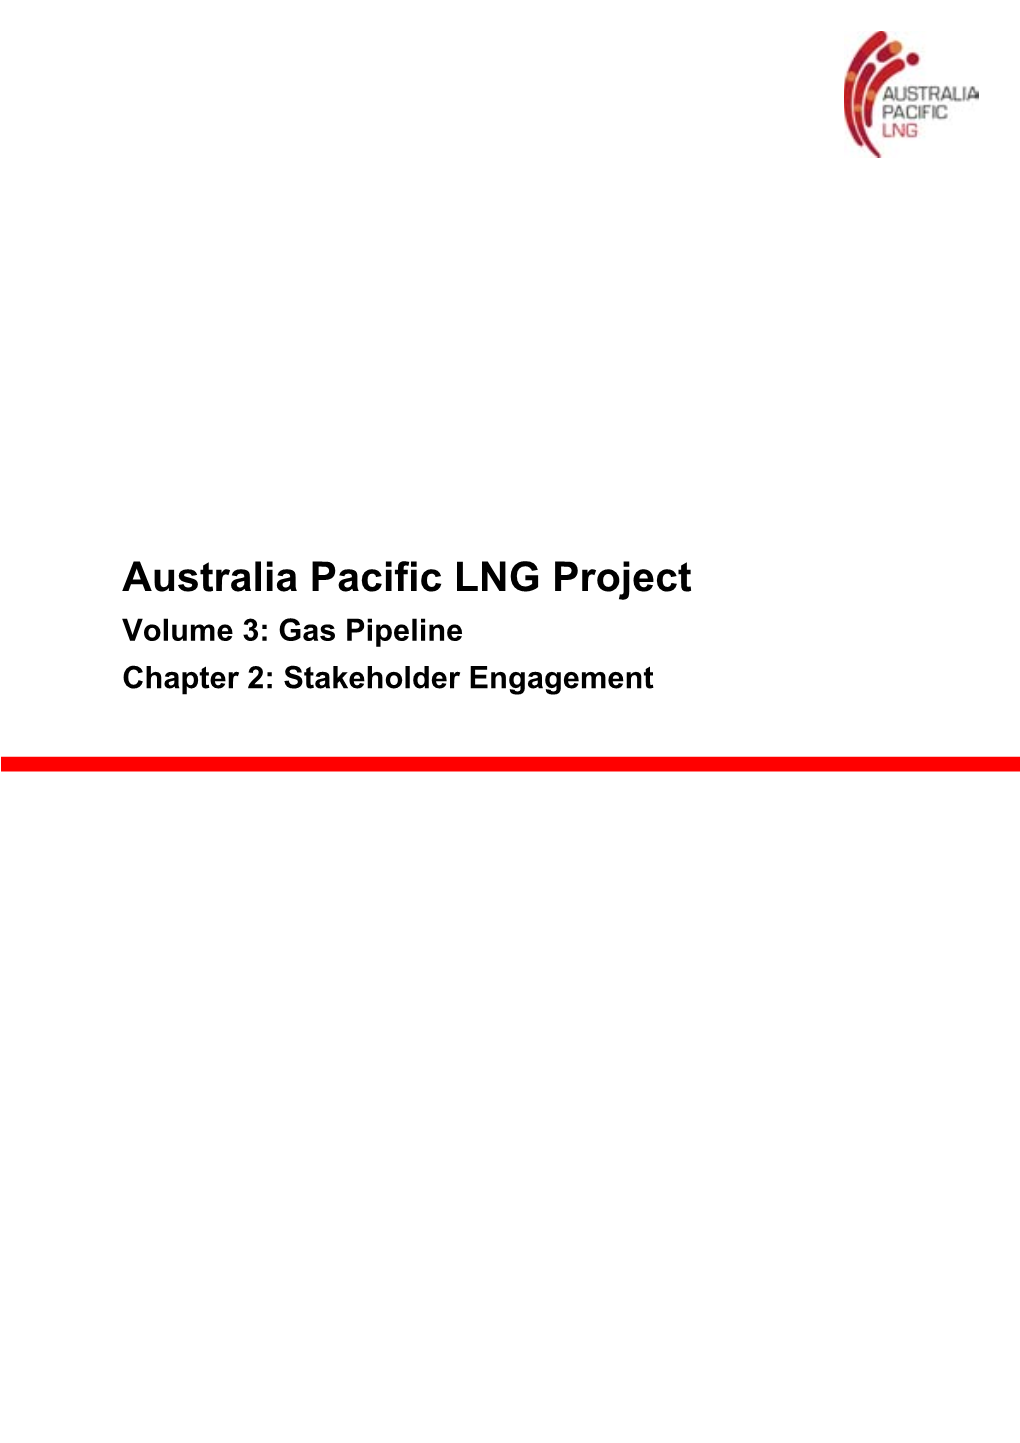 Reports Stakeholder and Community Activities and Feedback Obtained from 1 April to 9 November 2009